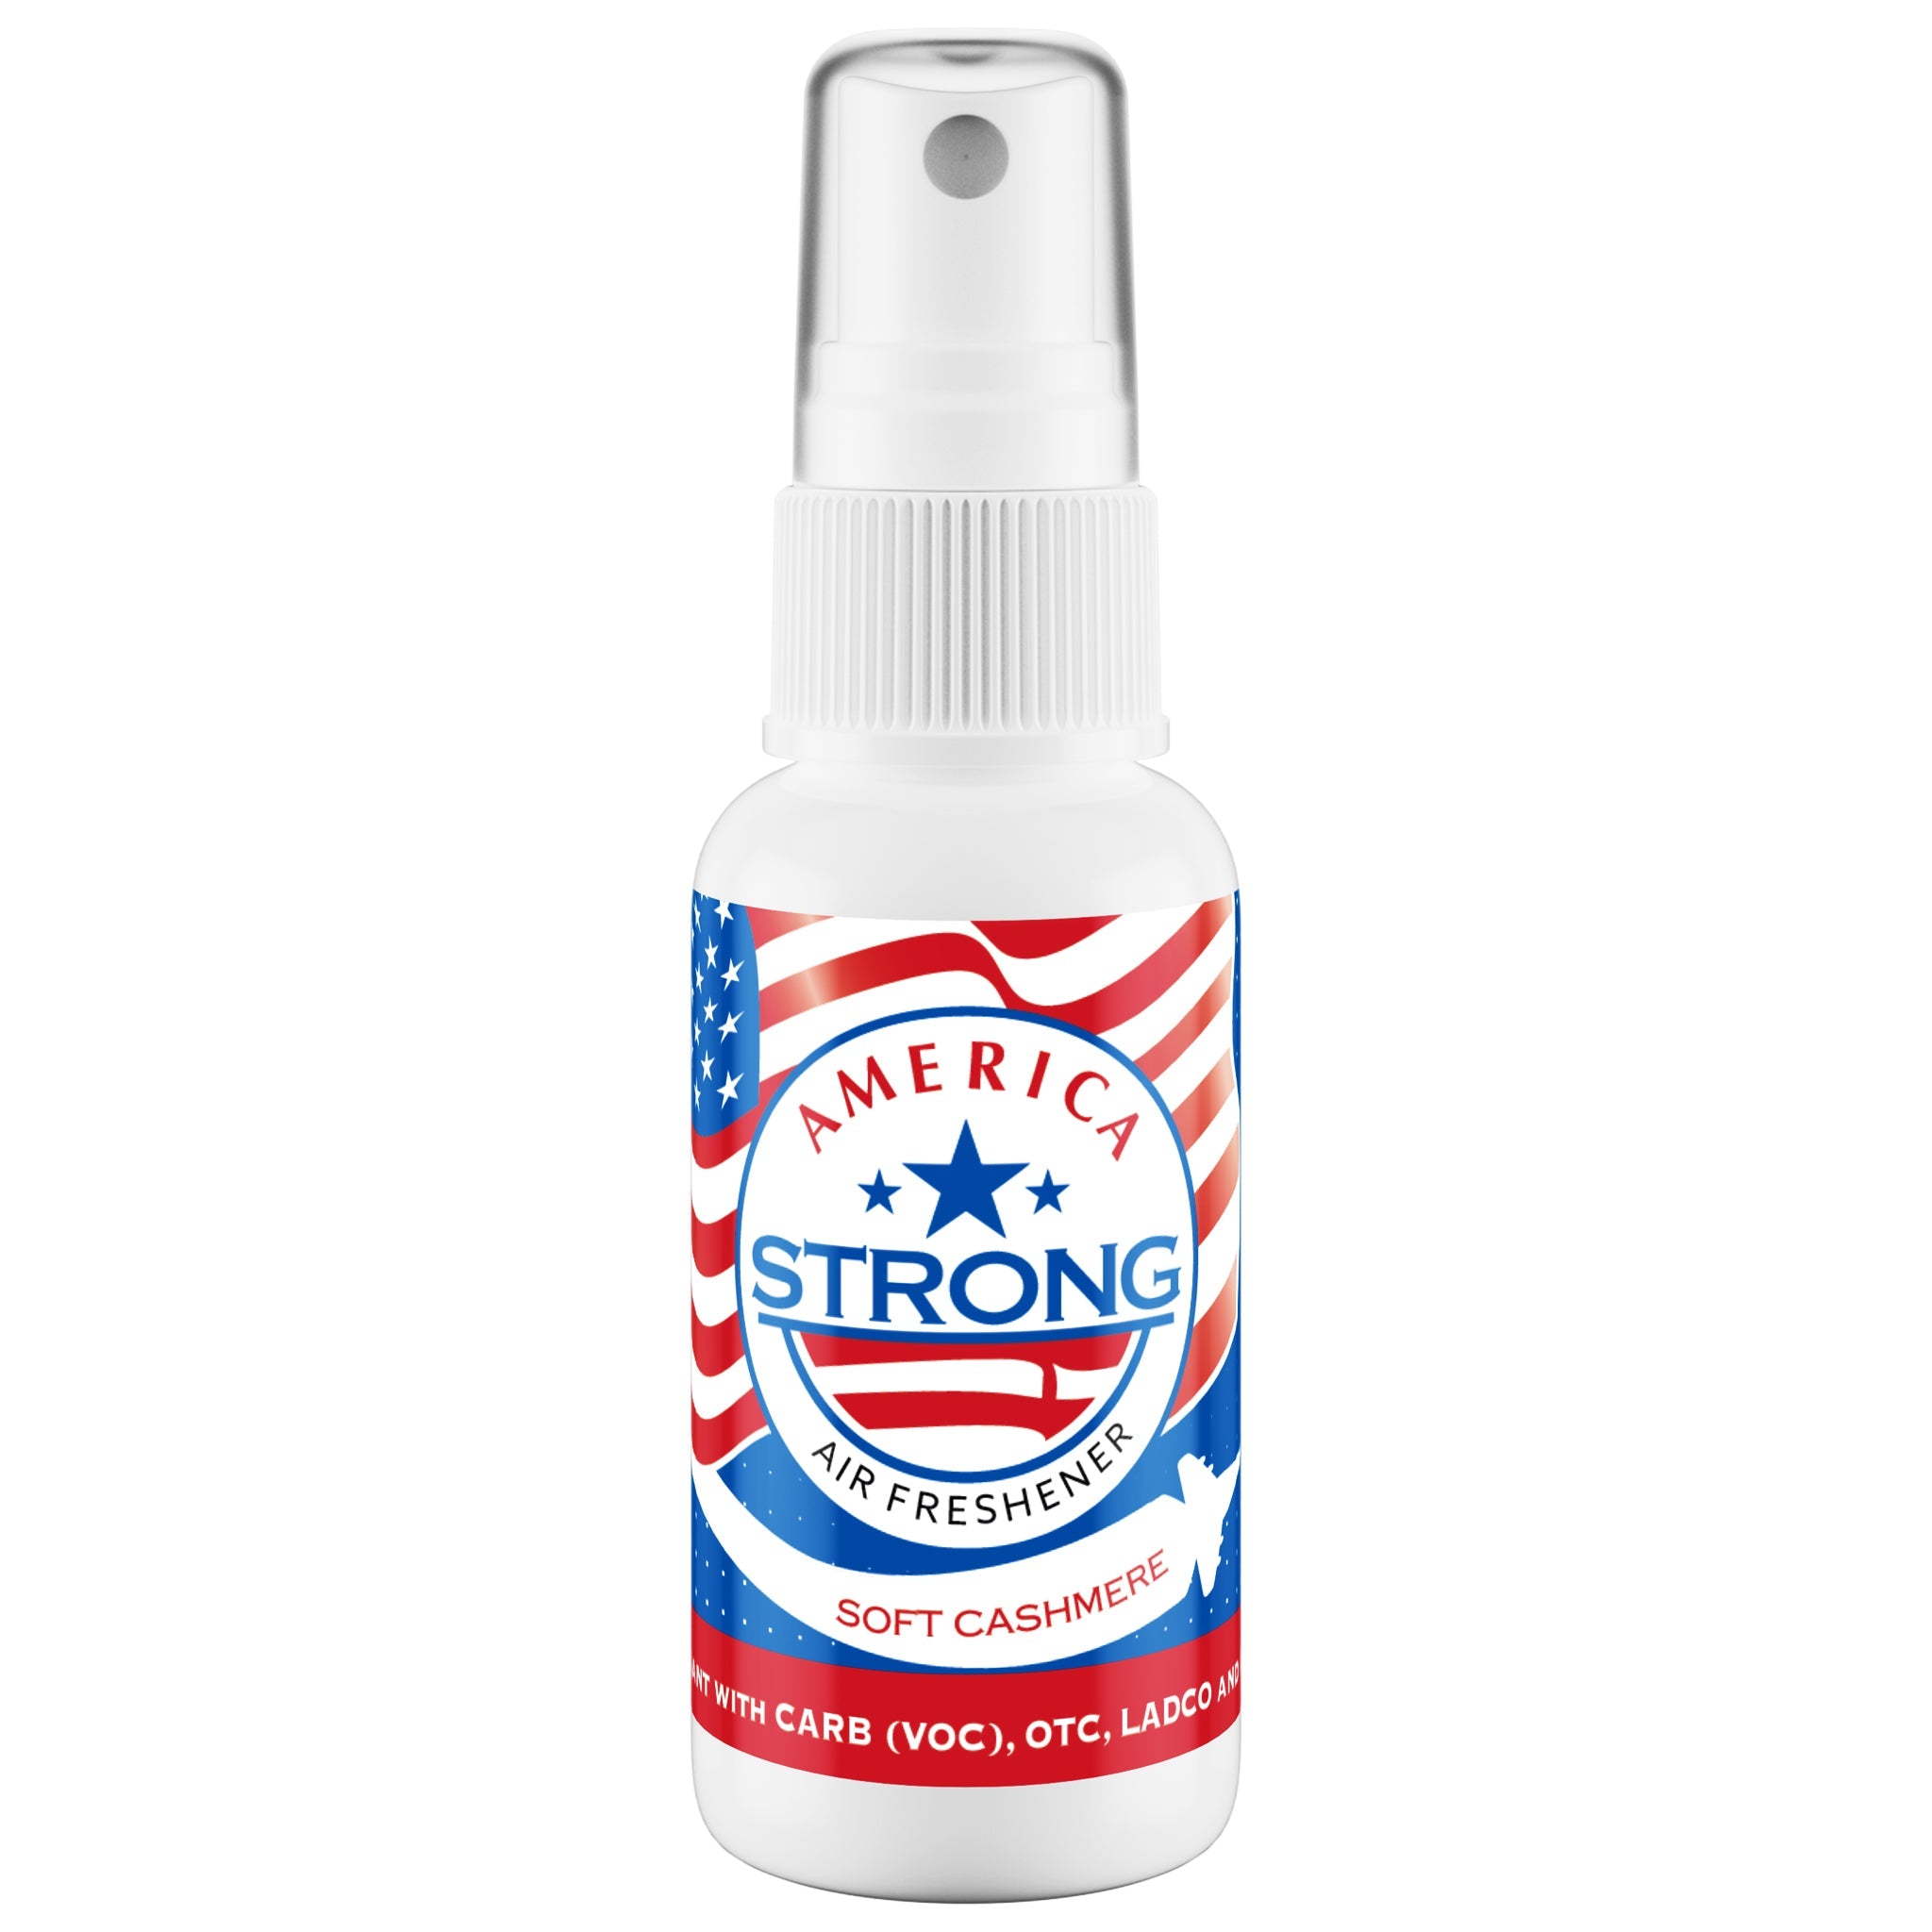 America Strong Air Freshener - Soft Cashmere Scent